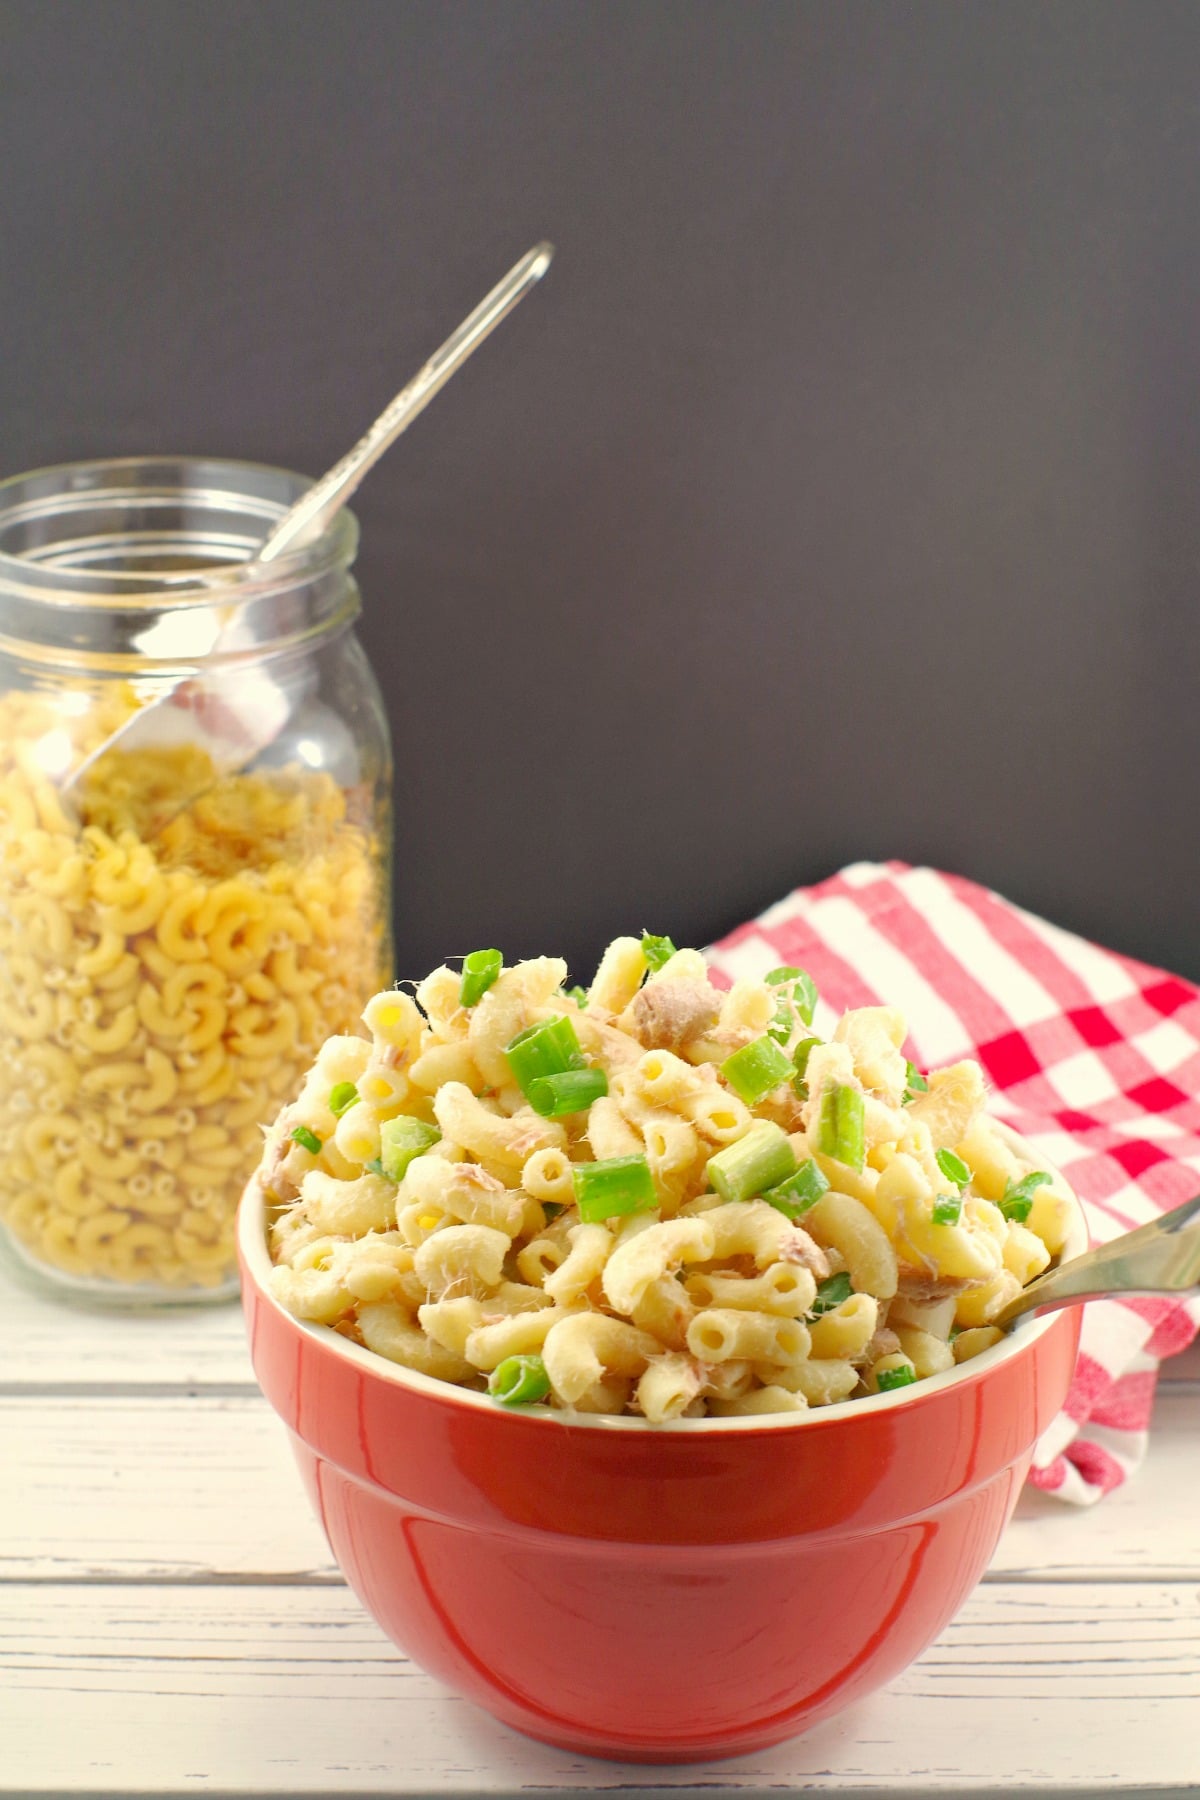 Macaroni salad in red bowl with uncooked macaroni in background